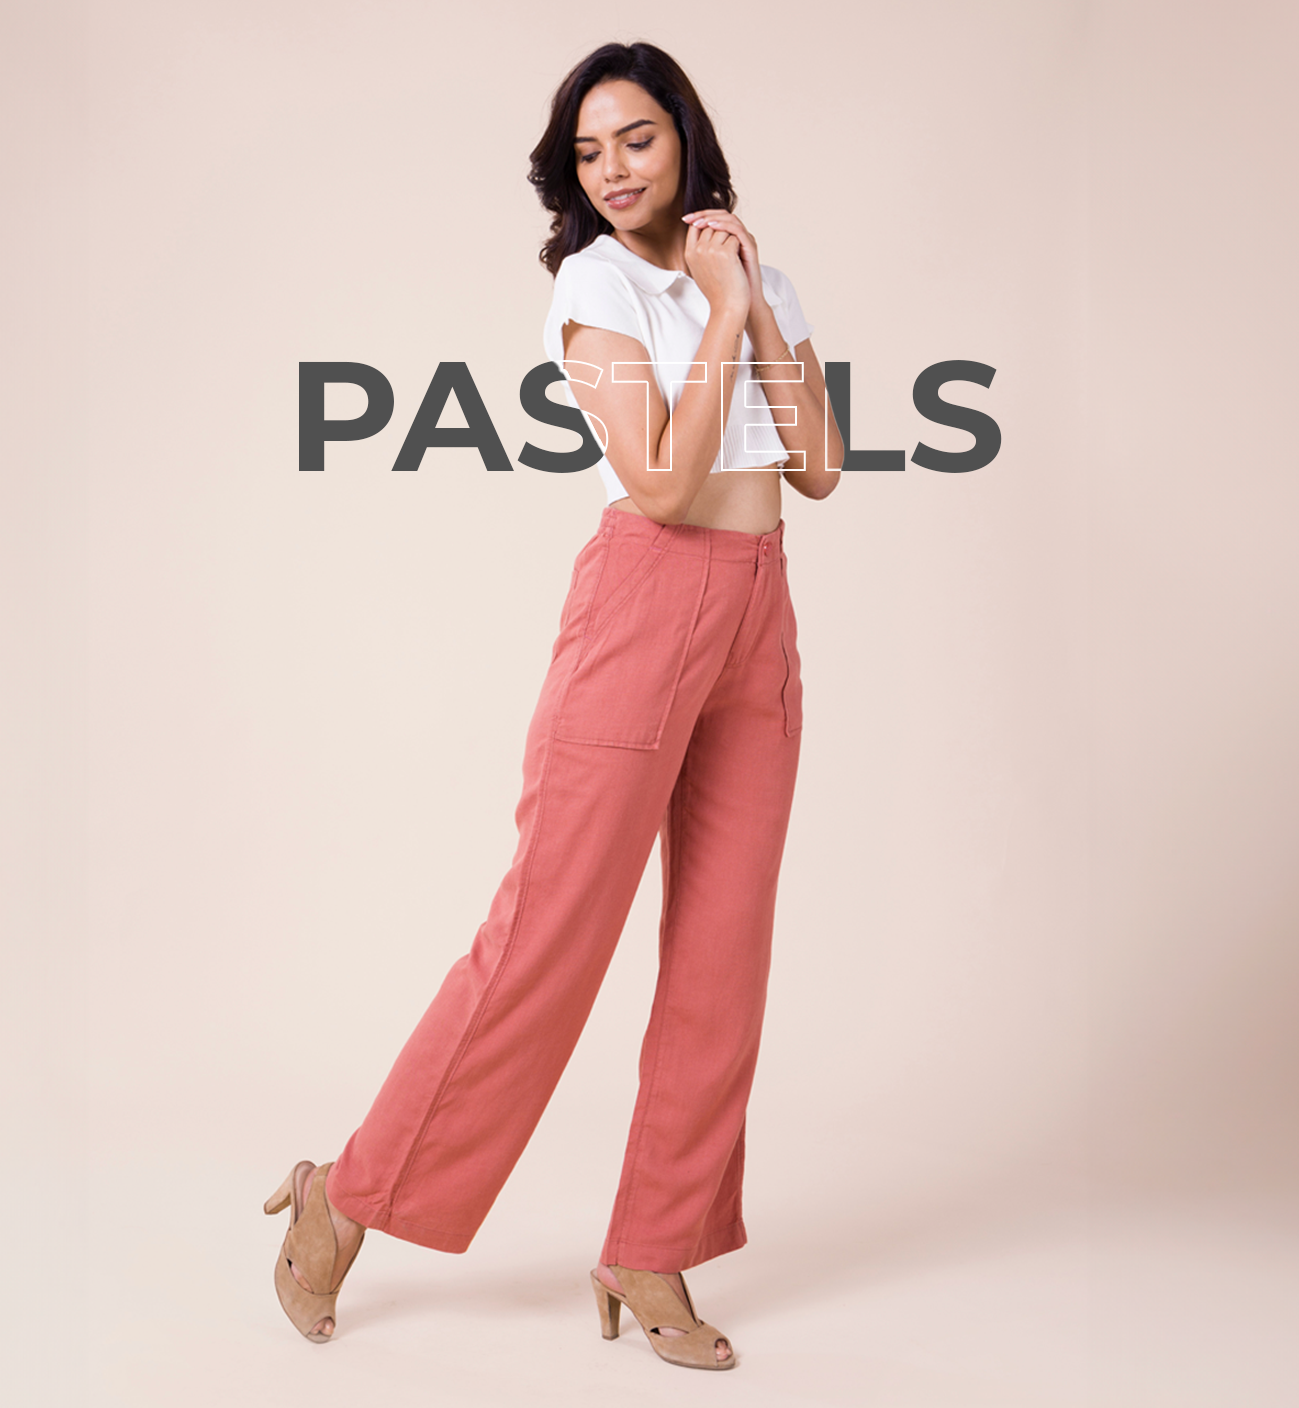 Pants for Women Cigarette Trousers High Waist Silk Pants Soft Breathable  Slim Skinny Pants (Red, XXL) 